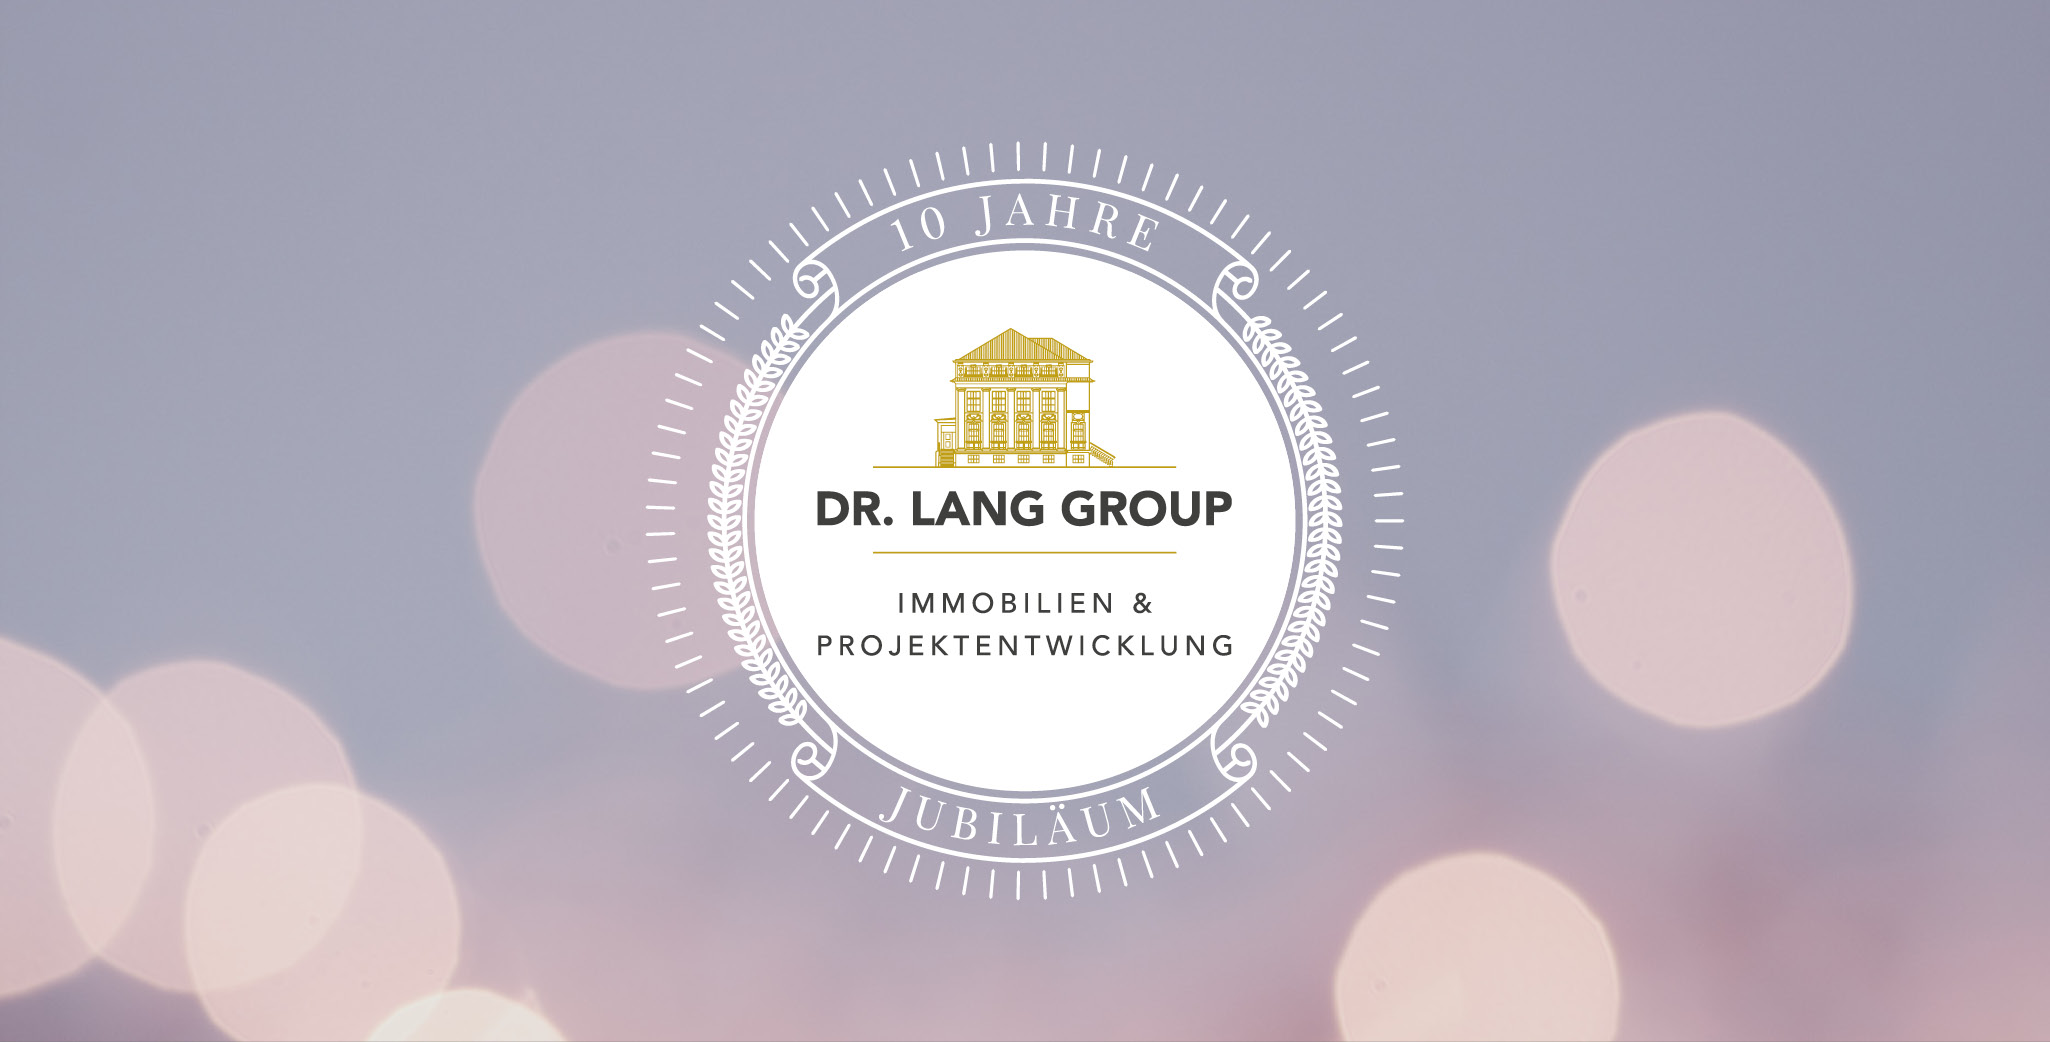 10 Jahre DR. LANG GROUP